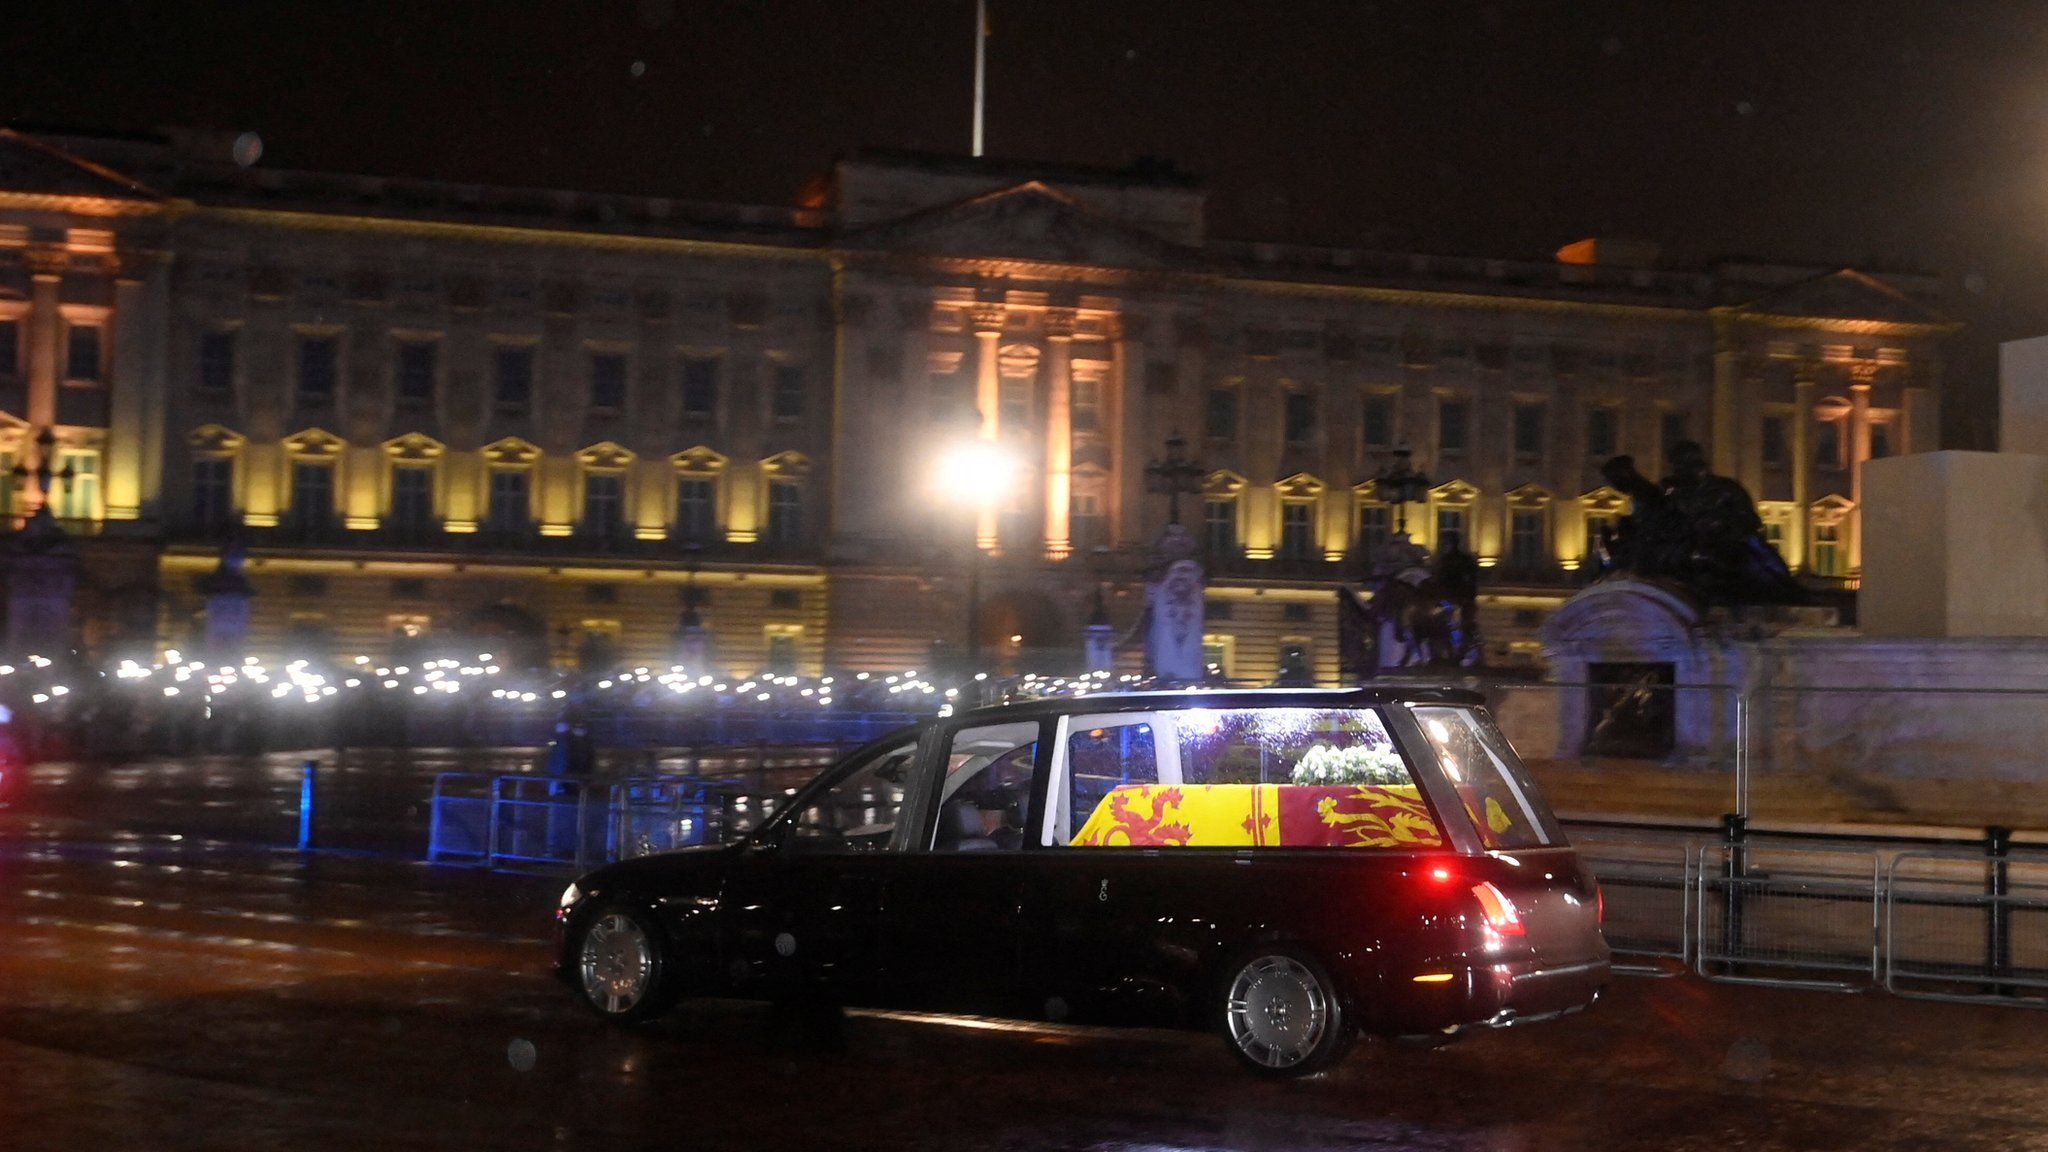 The coffin of Queen Elizabeth II arrives at Buckingham Palace in London